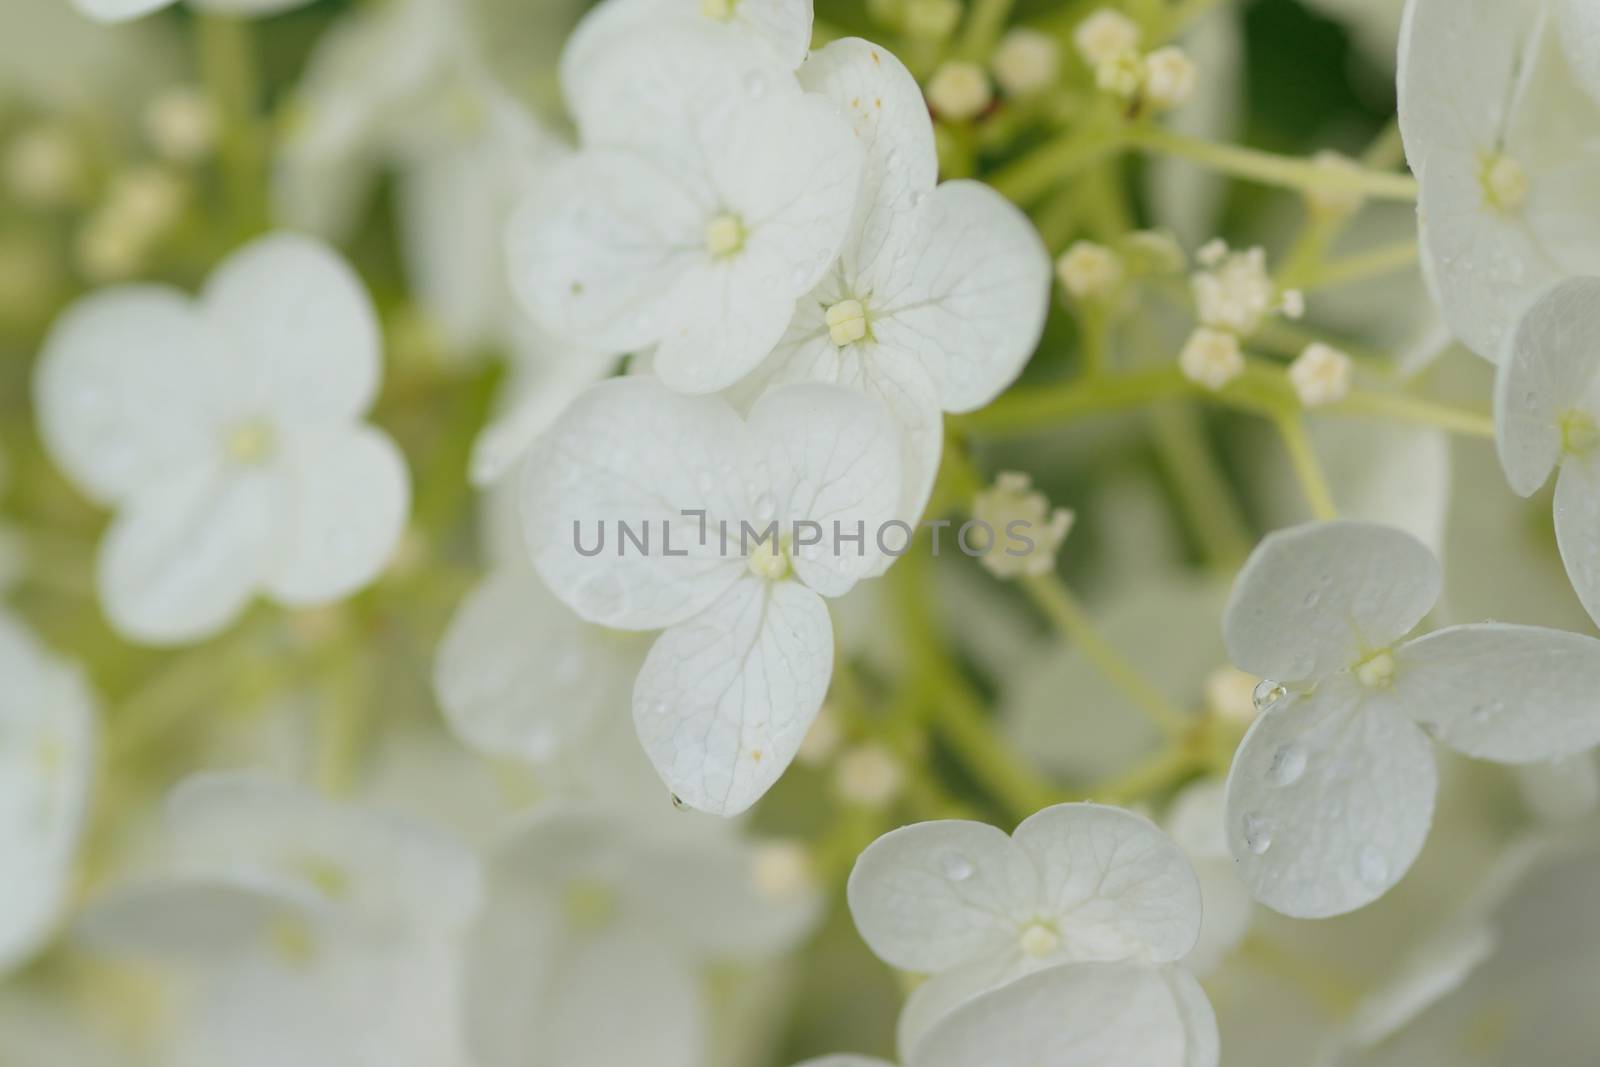 Macro texture of white colored Hydrangea flowers with water droplets by shubhashish